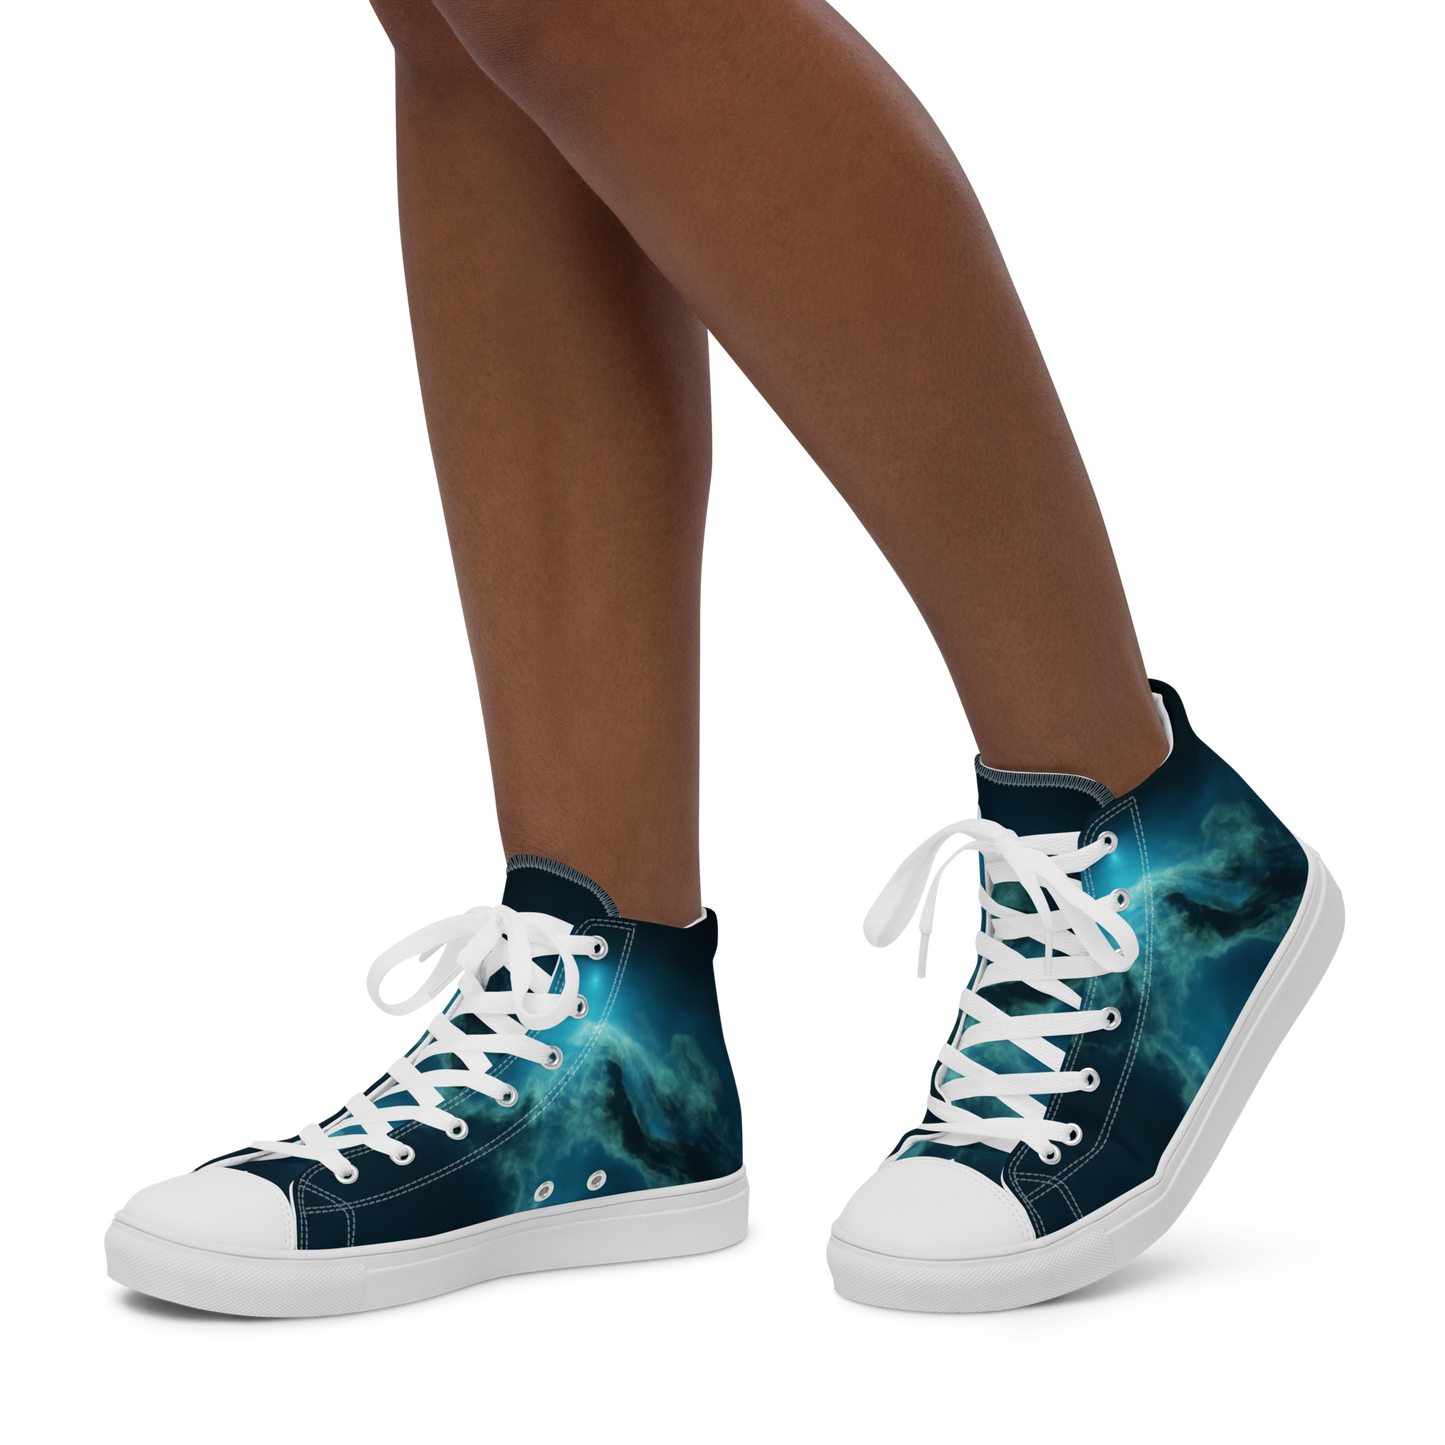 'Blue Two' Nebula Style Design Women’s high top canvas shoes